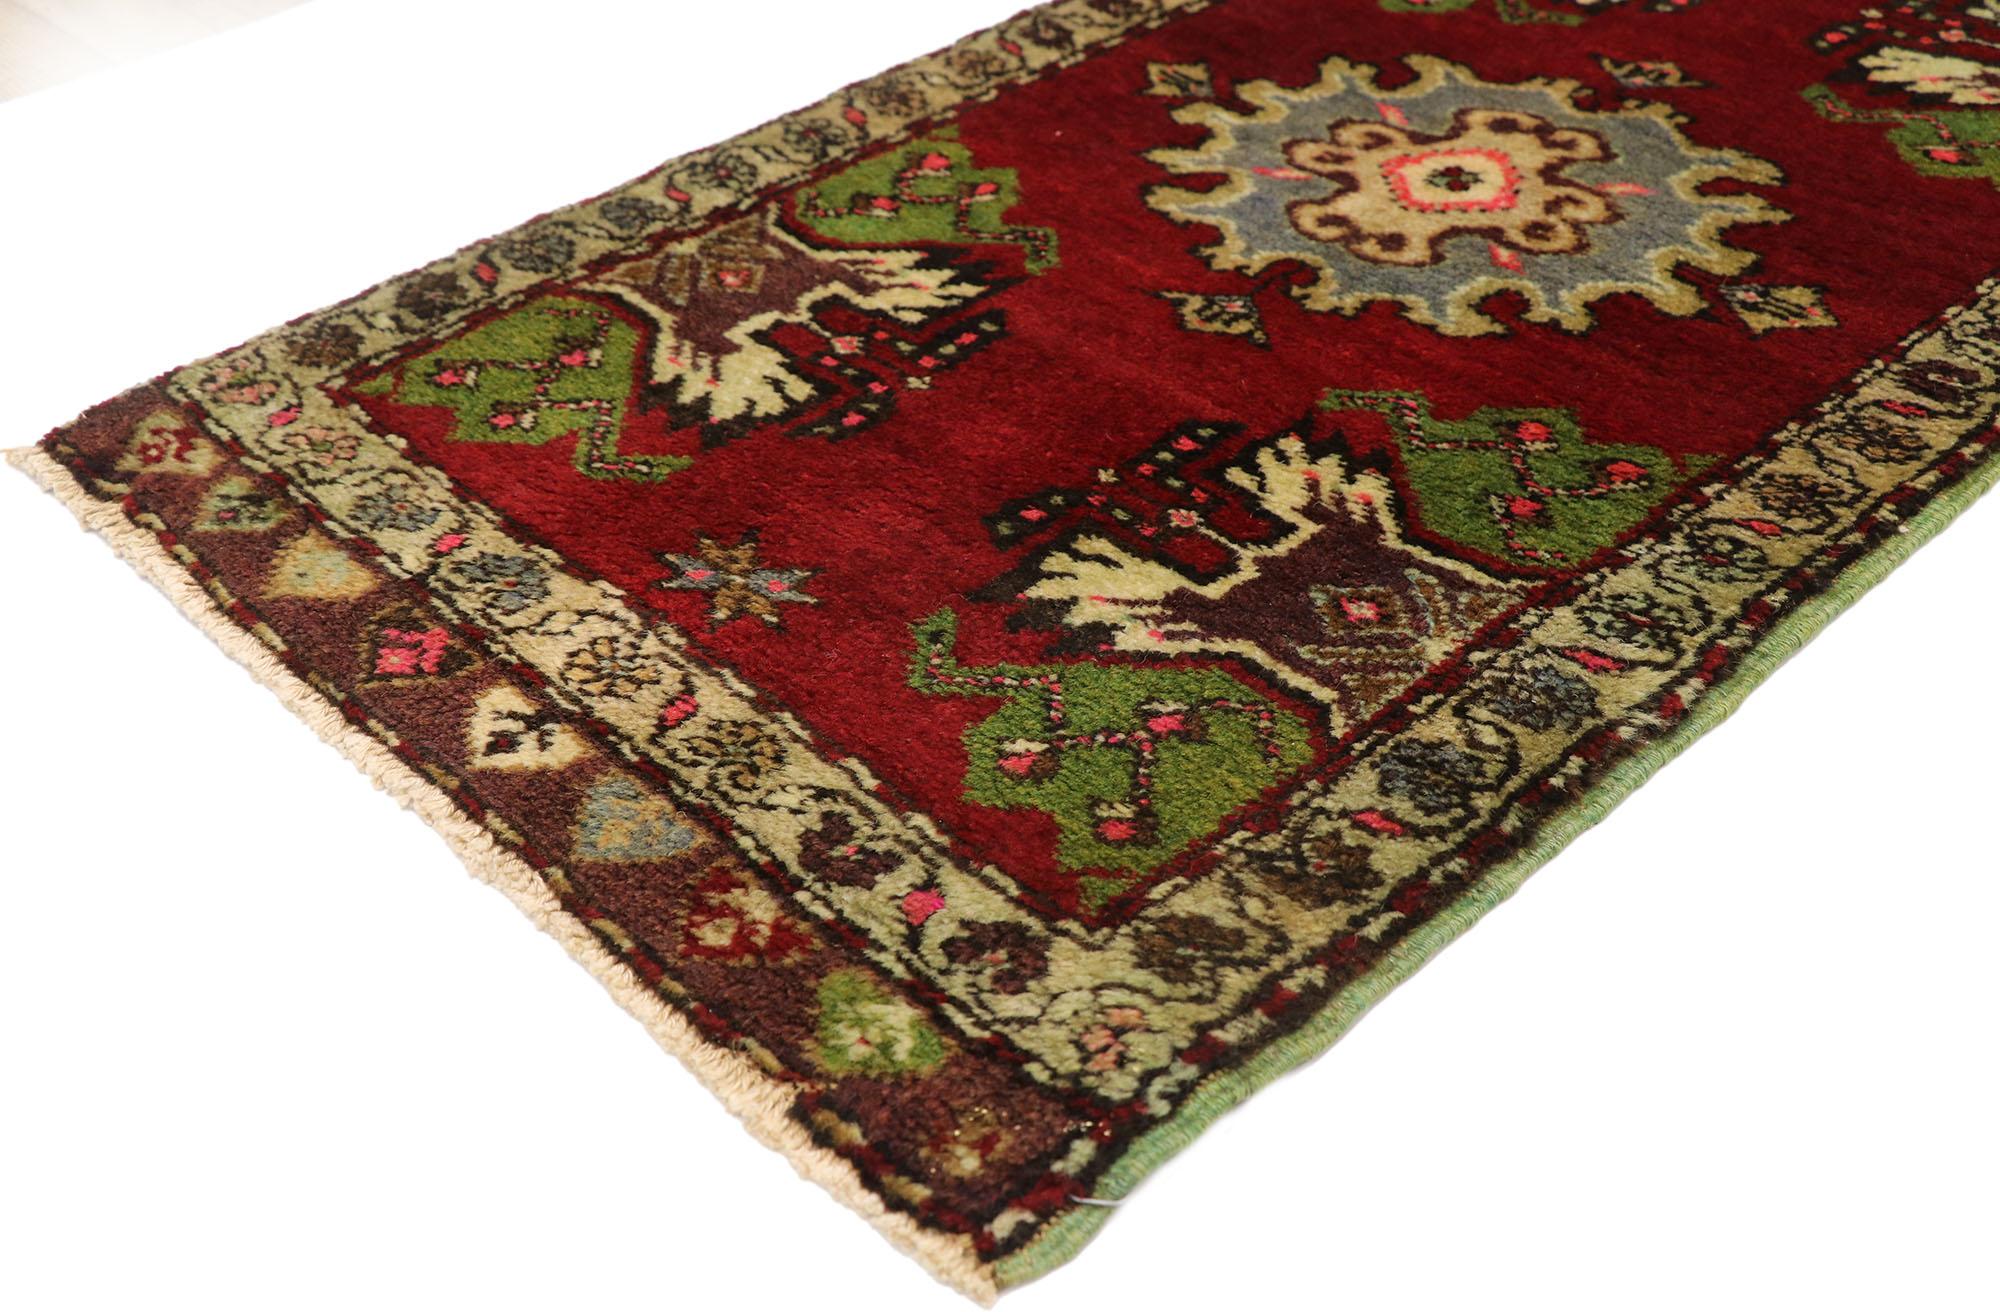 51465, vintage Turkish Oushak Yastik Scatter rug, small accent rug 01'10 x 03'06. This hand knotted wool vintage Turkish Oushak Yastik scatter rug features a central stepped medallion patterned with a geometric botanical scene flanked with four